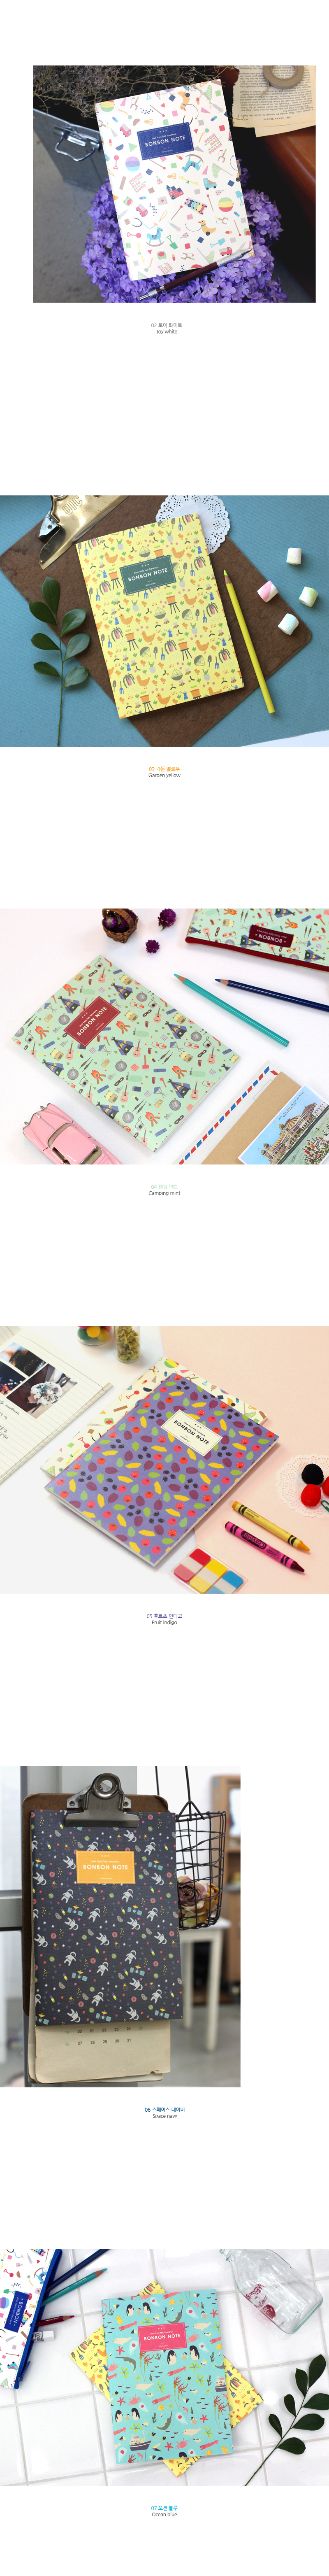 the magic notebook stationery shop uk [the magic notebook, stationery shop, the magic notebook uk]